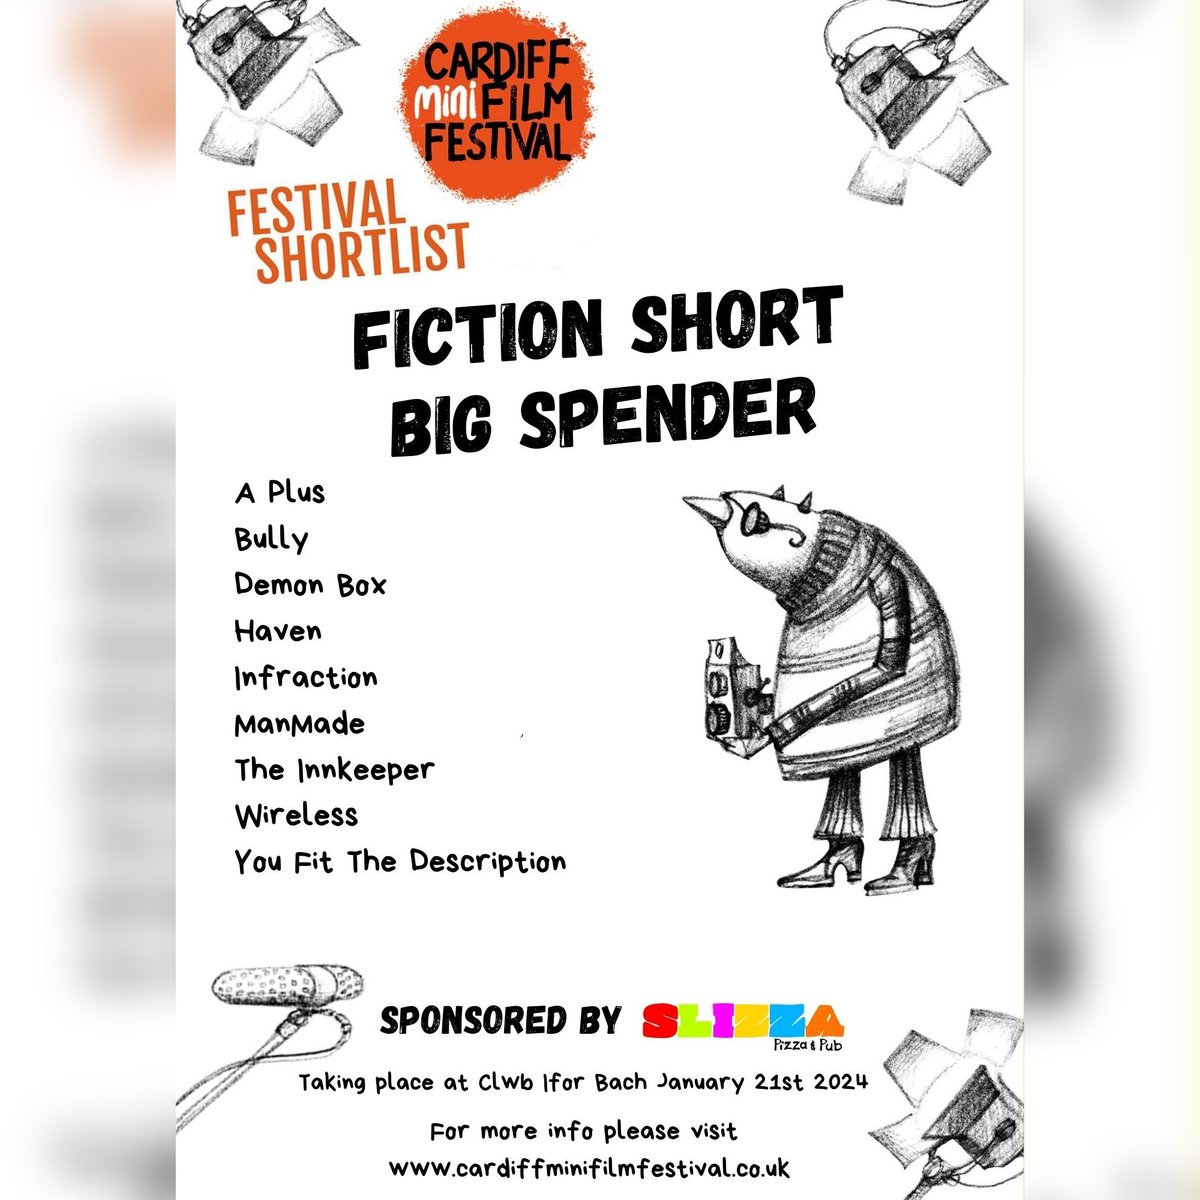 Announcement 📢 Congratulations to our entries who have been shortlisted in this year's Cardiff Mini Festival 🎬📽️ FICTION SHORT BIG SPENDER